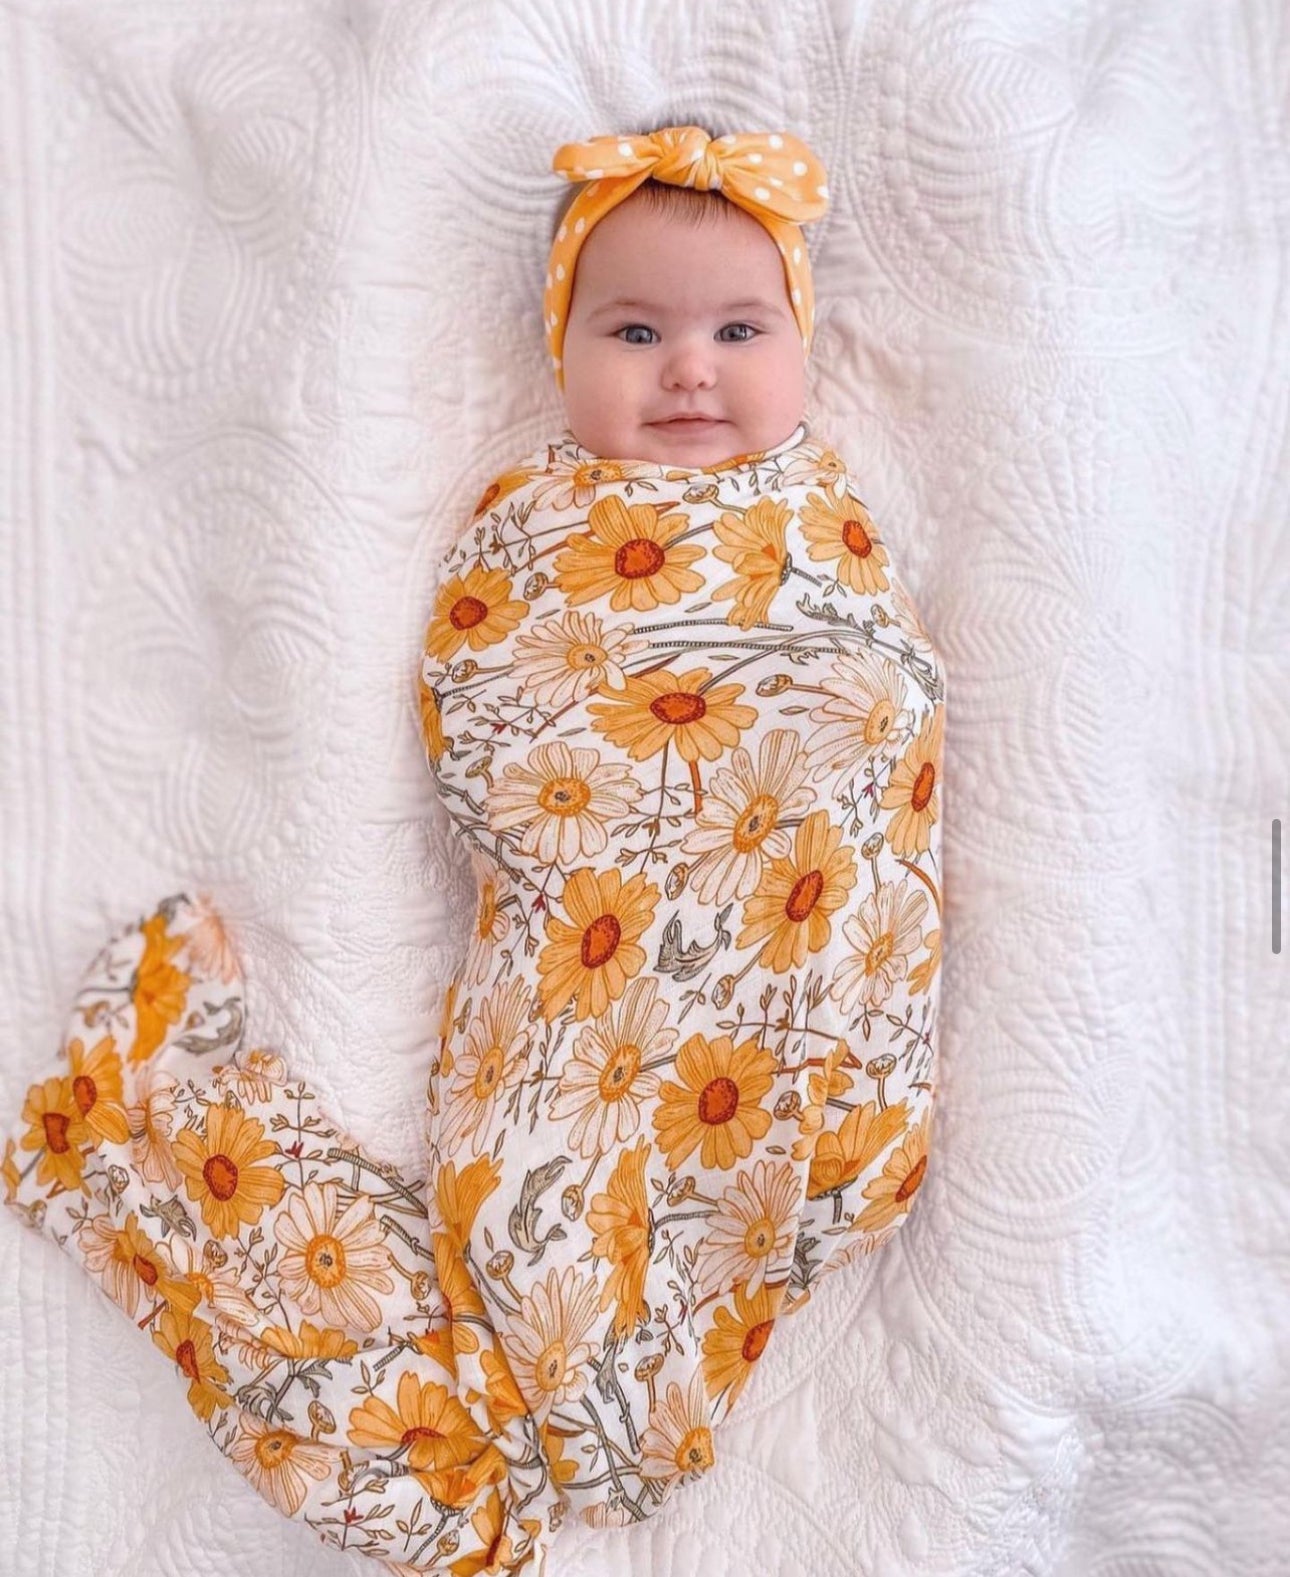 Sunflower Baby Swaddle - Baby Swaddles & Wraps at Louie Meets Lola